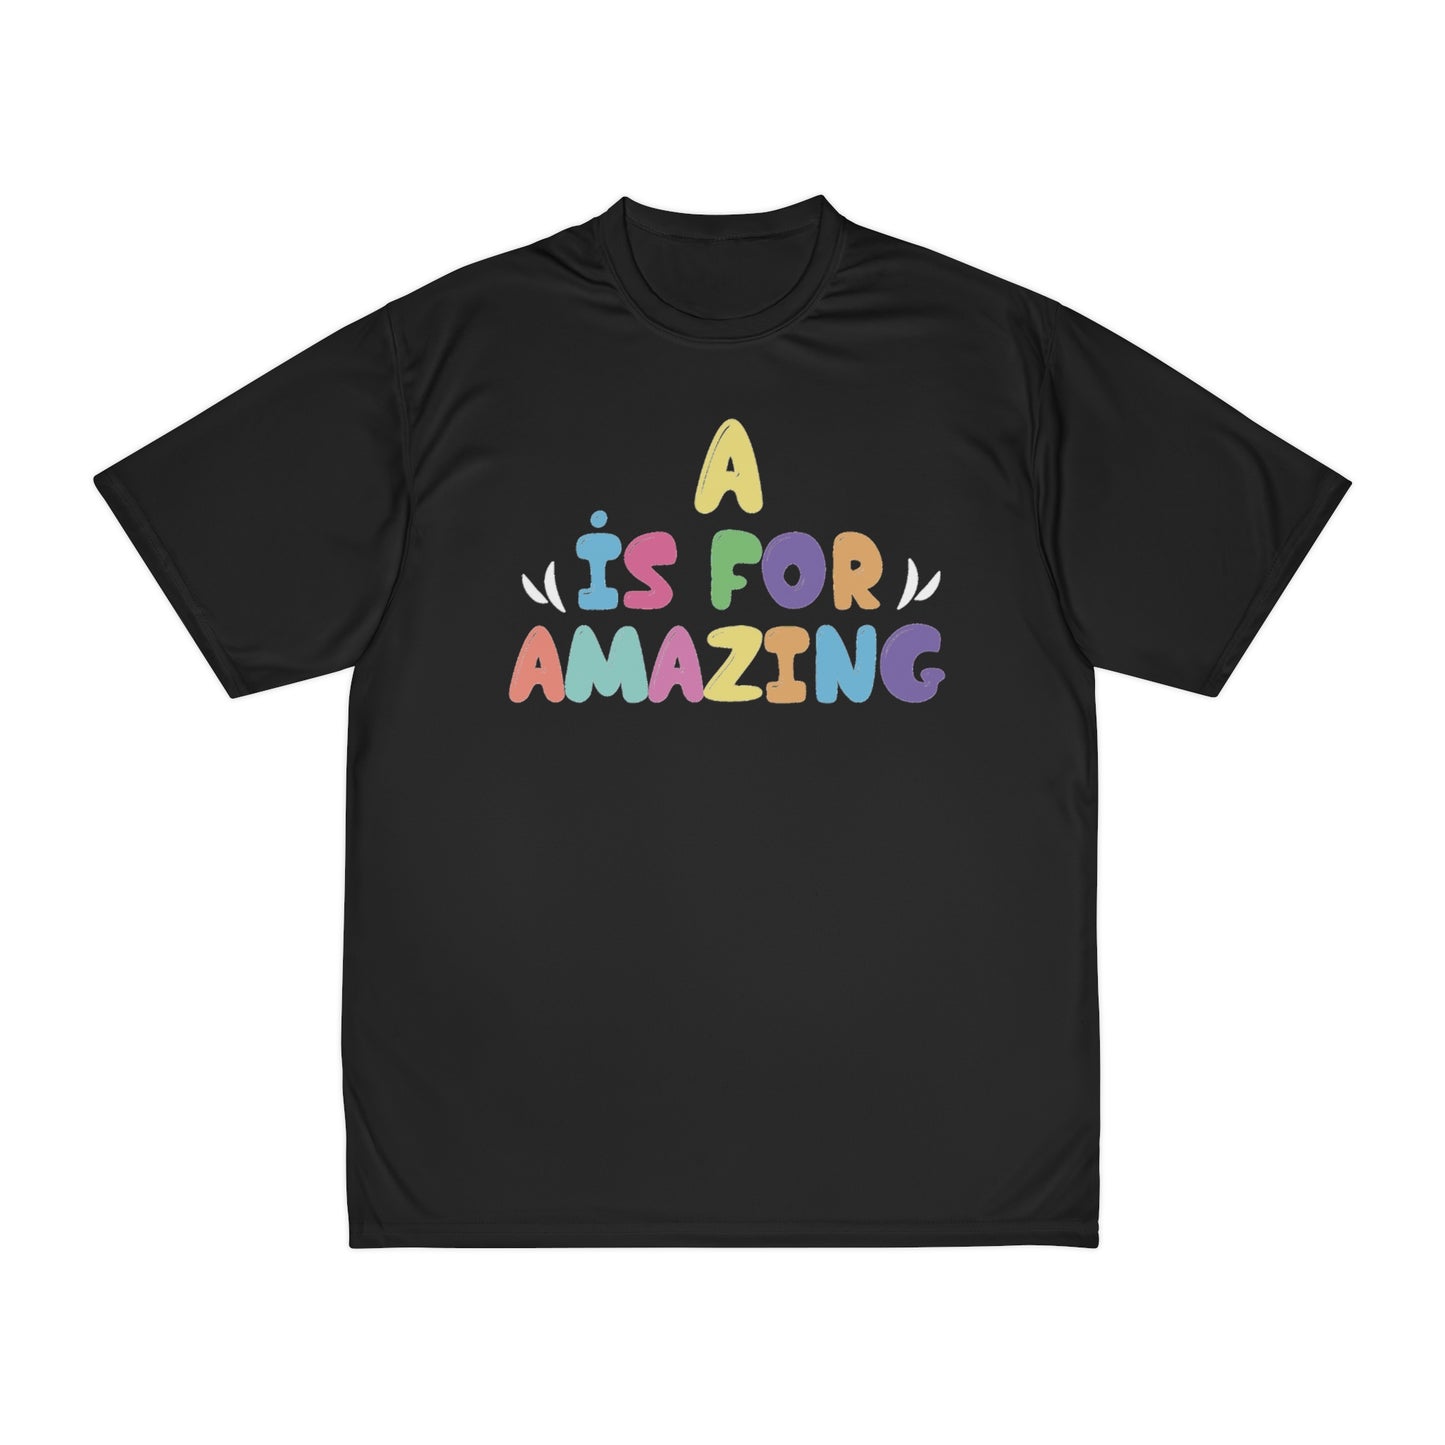 A is For Amazing Men's Performance T-Shirt, Amazing shirts, Inspirational shirts, Motivational Shirts, Positive shirts, Trendy tees